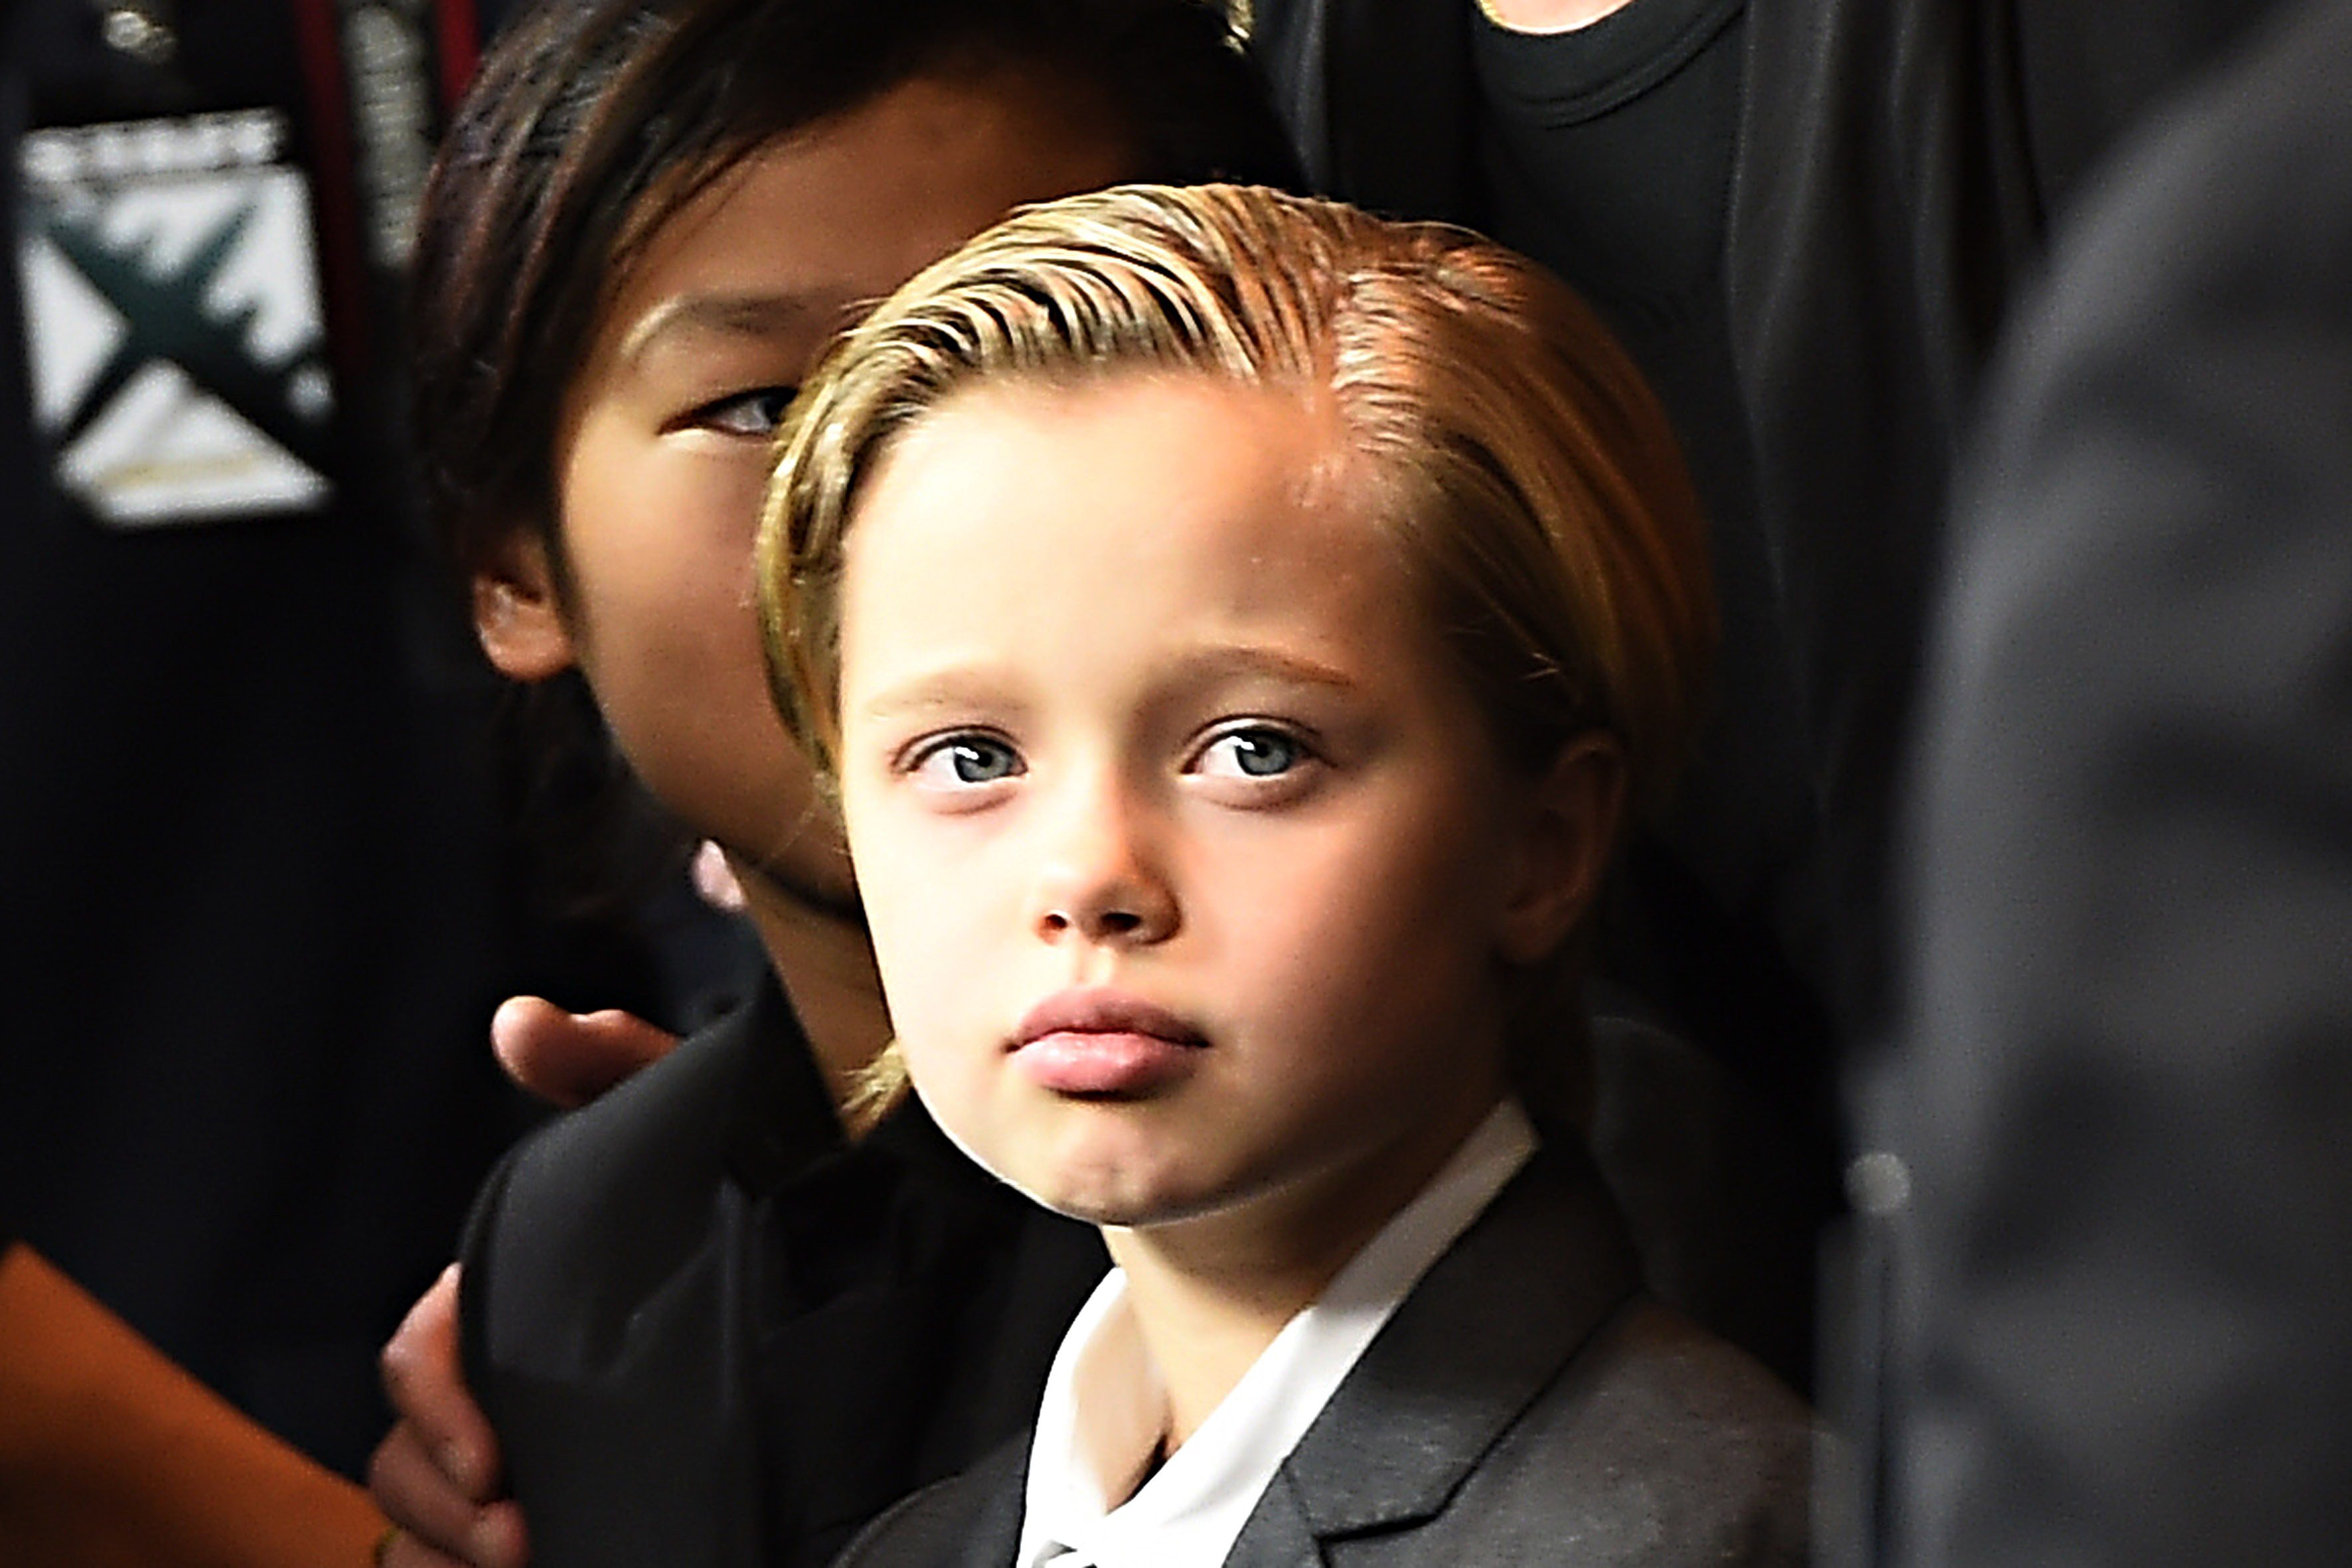 Shiloh Jolie-Pitt at the US premiere of "Unbroken" on December 15, 2014, in Hollywood, California. | Source: Getty Images